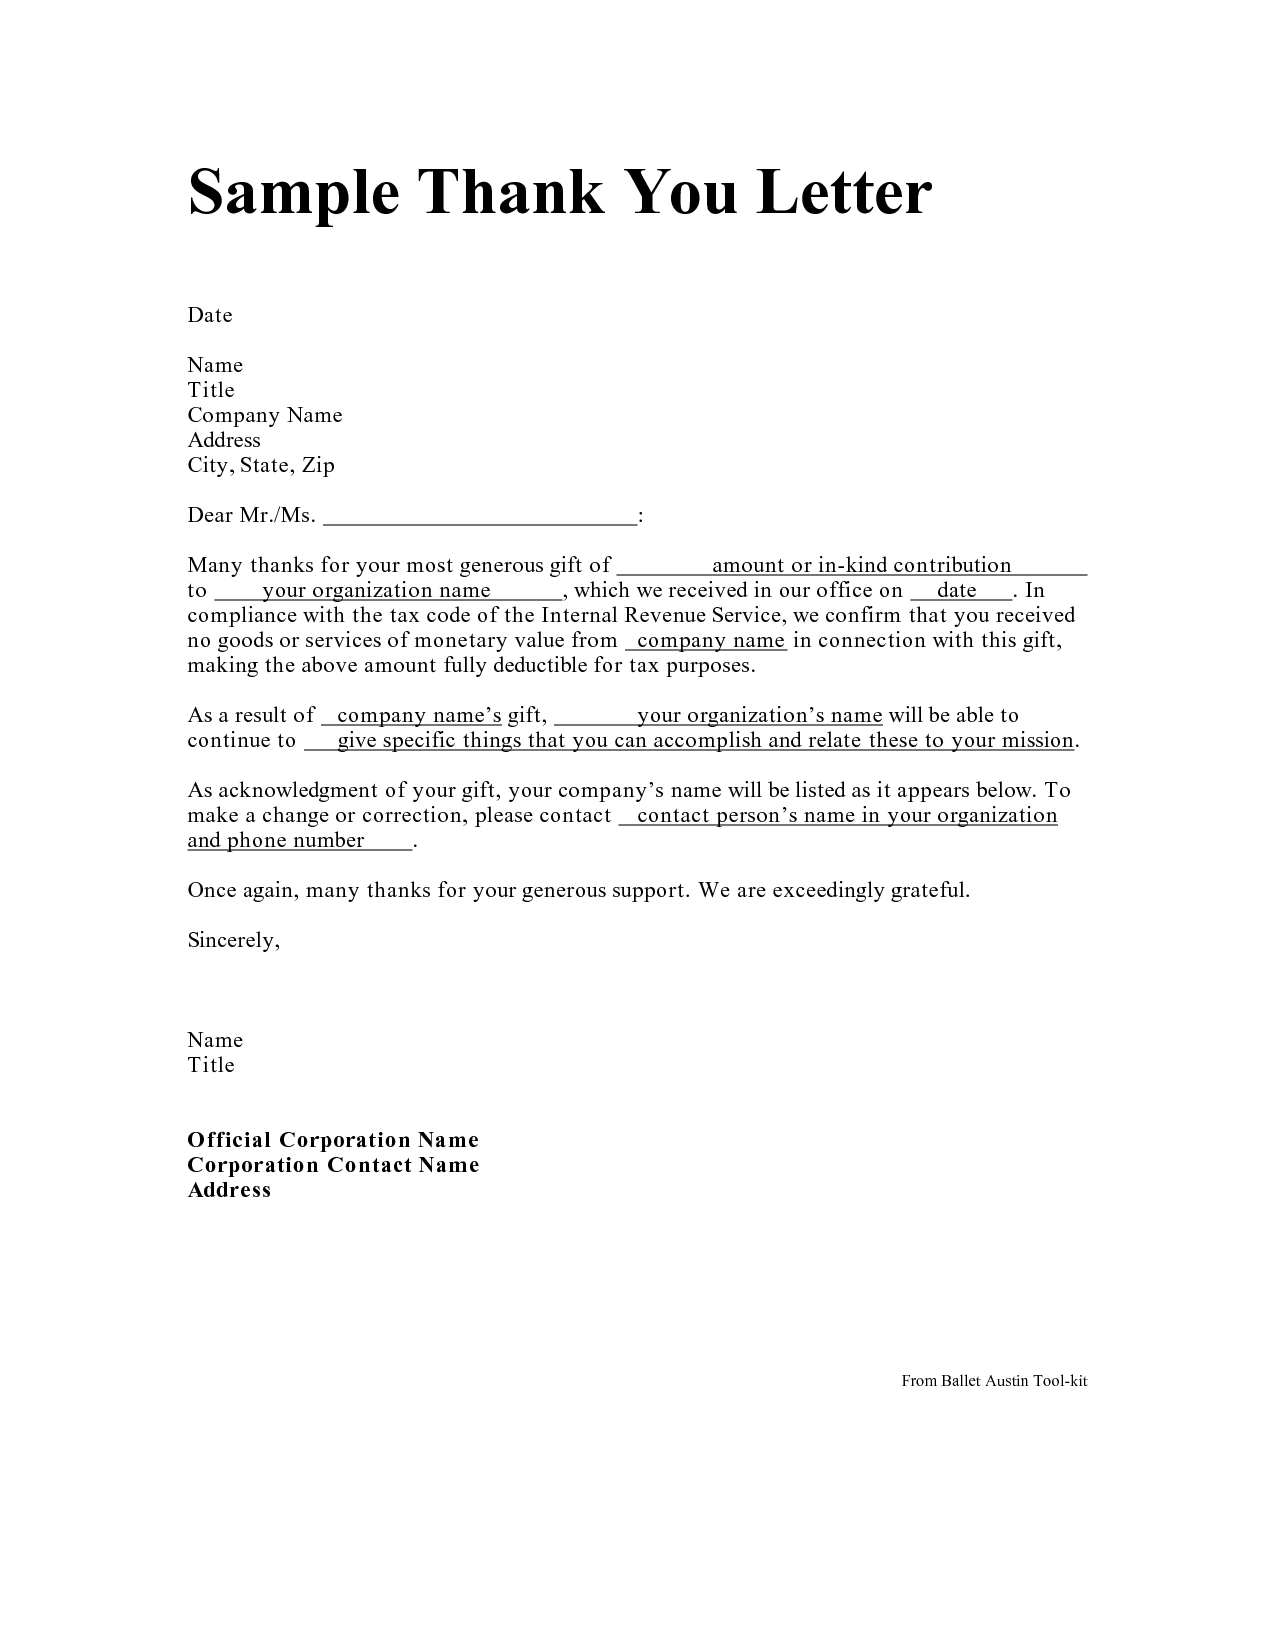 Range Rover Letter Template - Personal Thank You Letter Personal Thank You Letter Samples